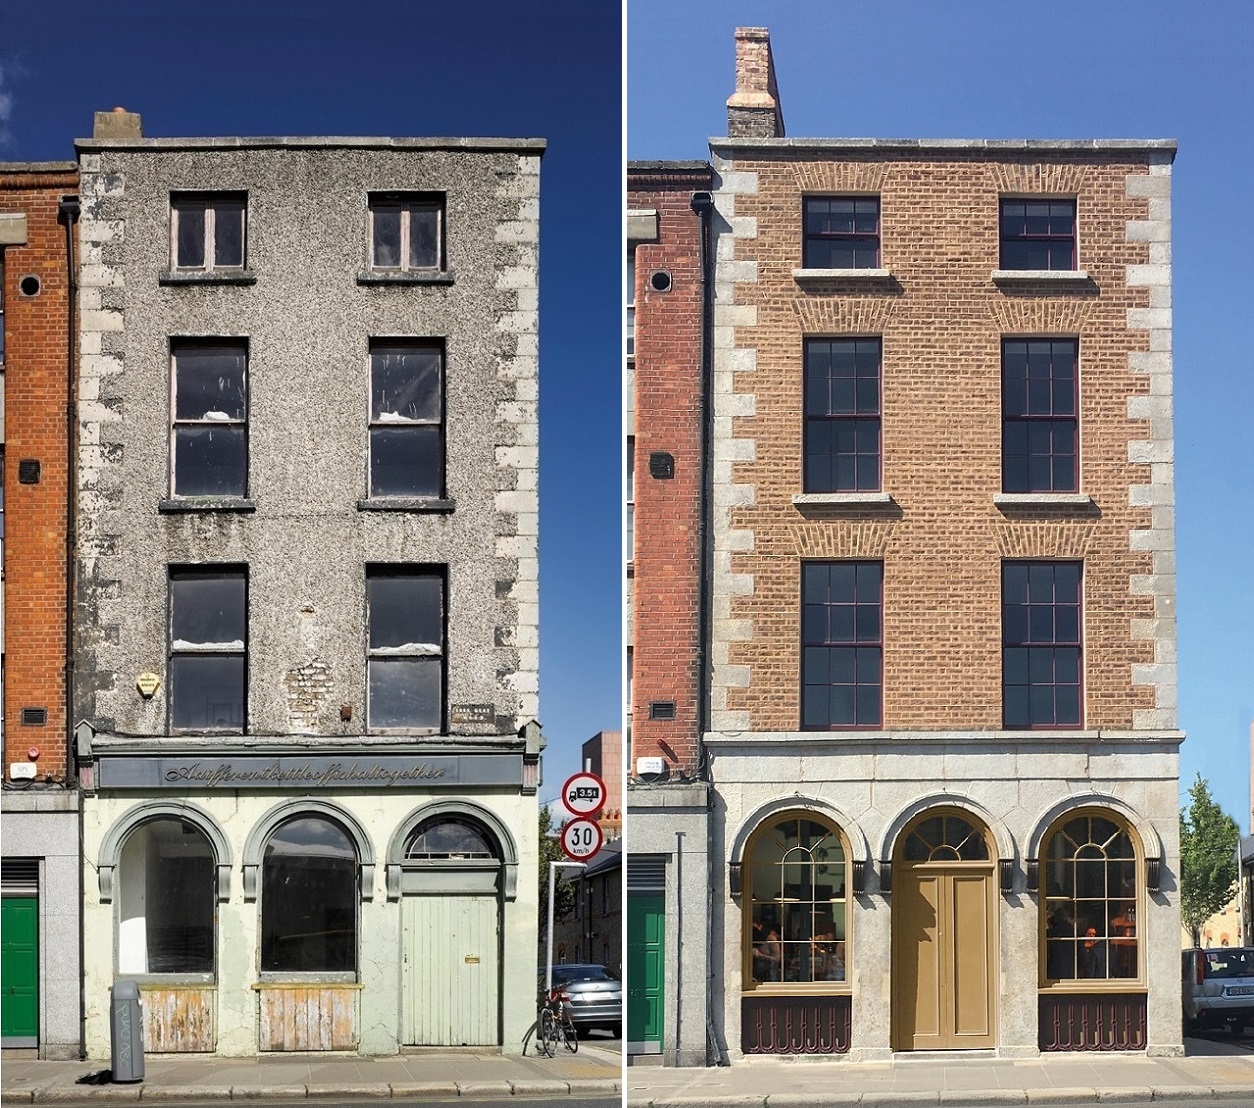 Side by side images displaying the before (derelict) and after (renovated) 4 storey building